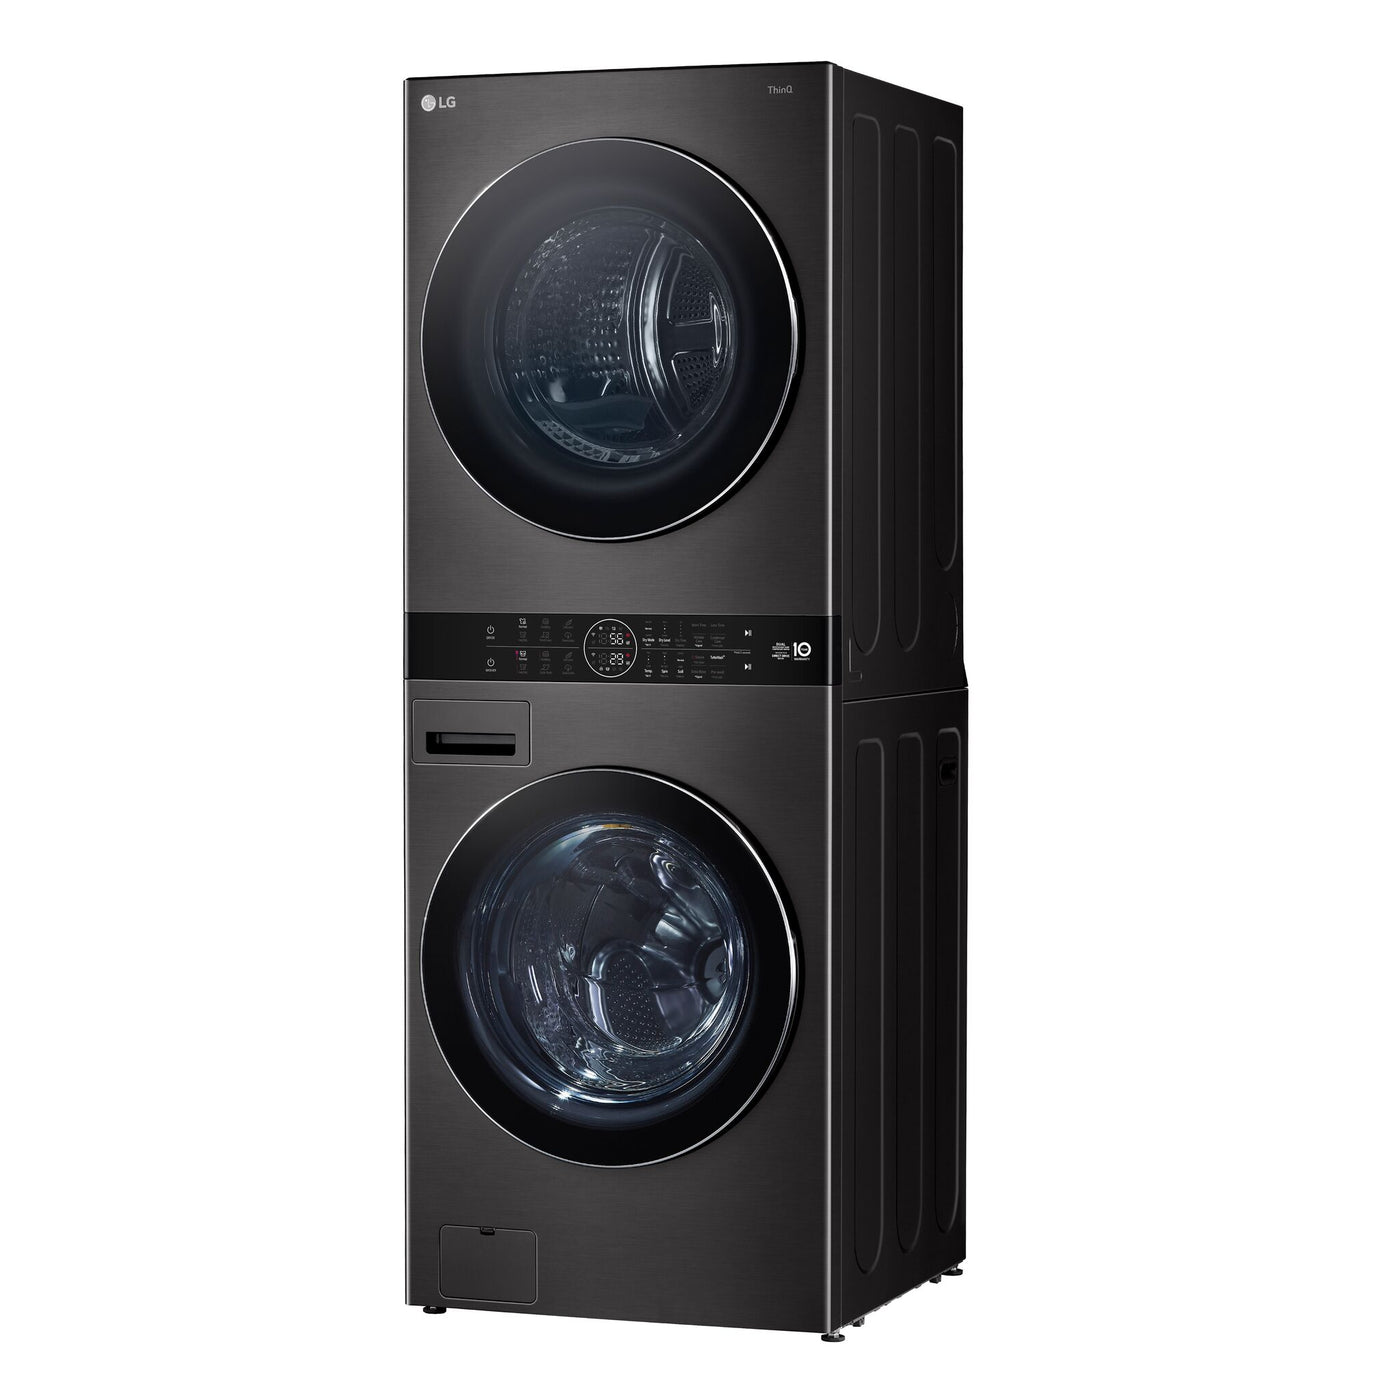 LG Black Steel Single Unit WashTower™ with Front Load Washer (5.8 Cu.ft) and Electric Ventless Heat Pump Dryer (7.8 Cu.ft) - WKHC252HBA